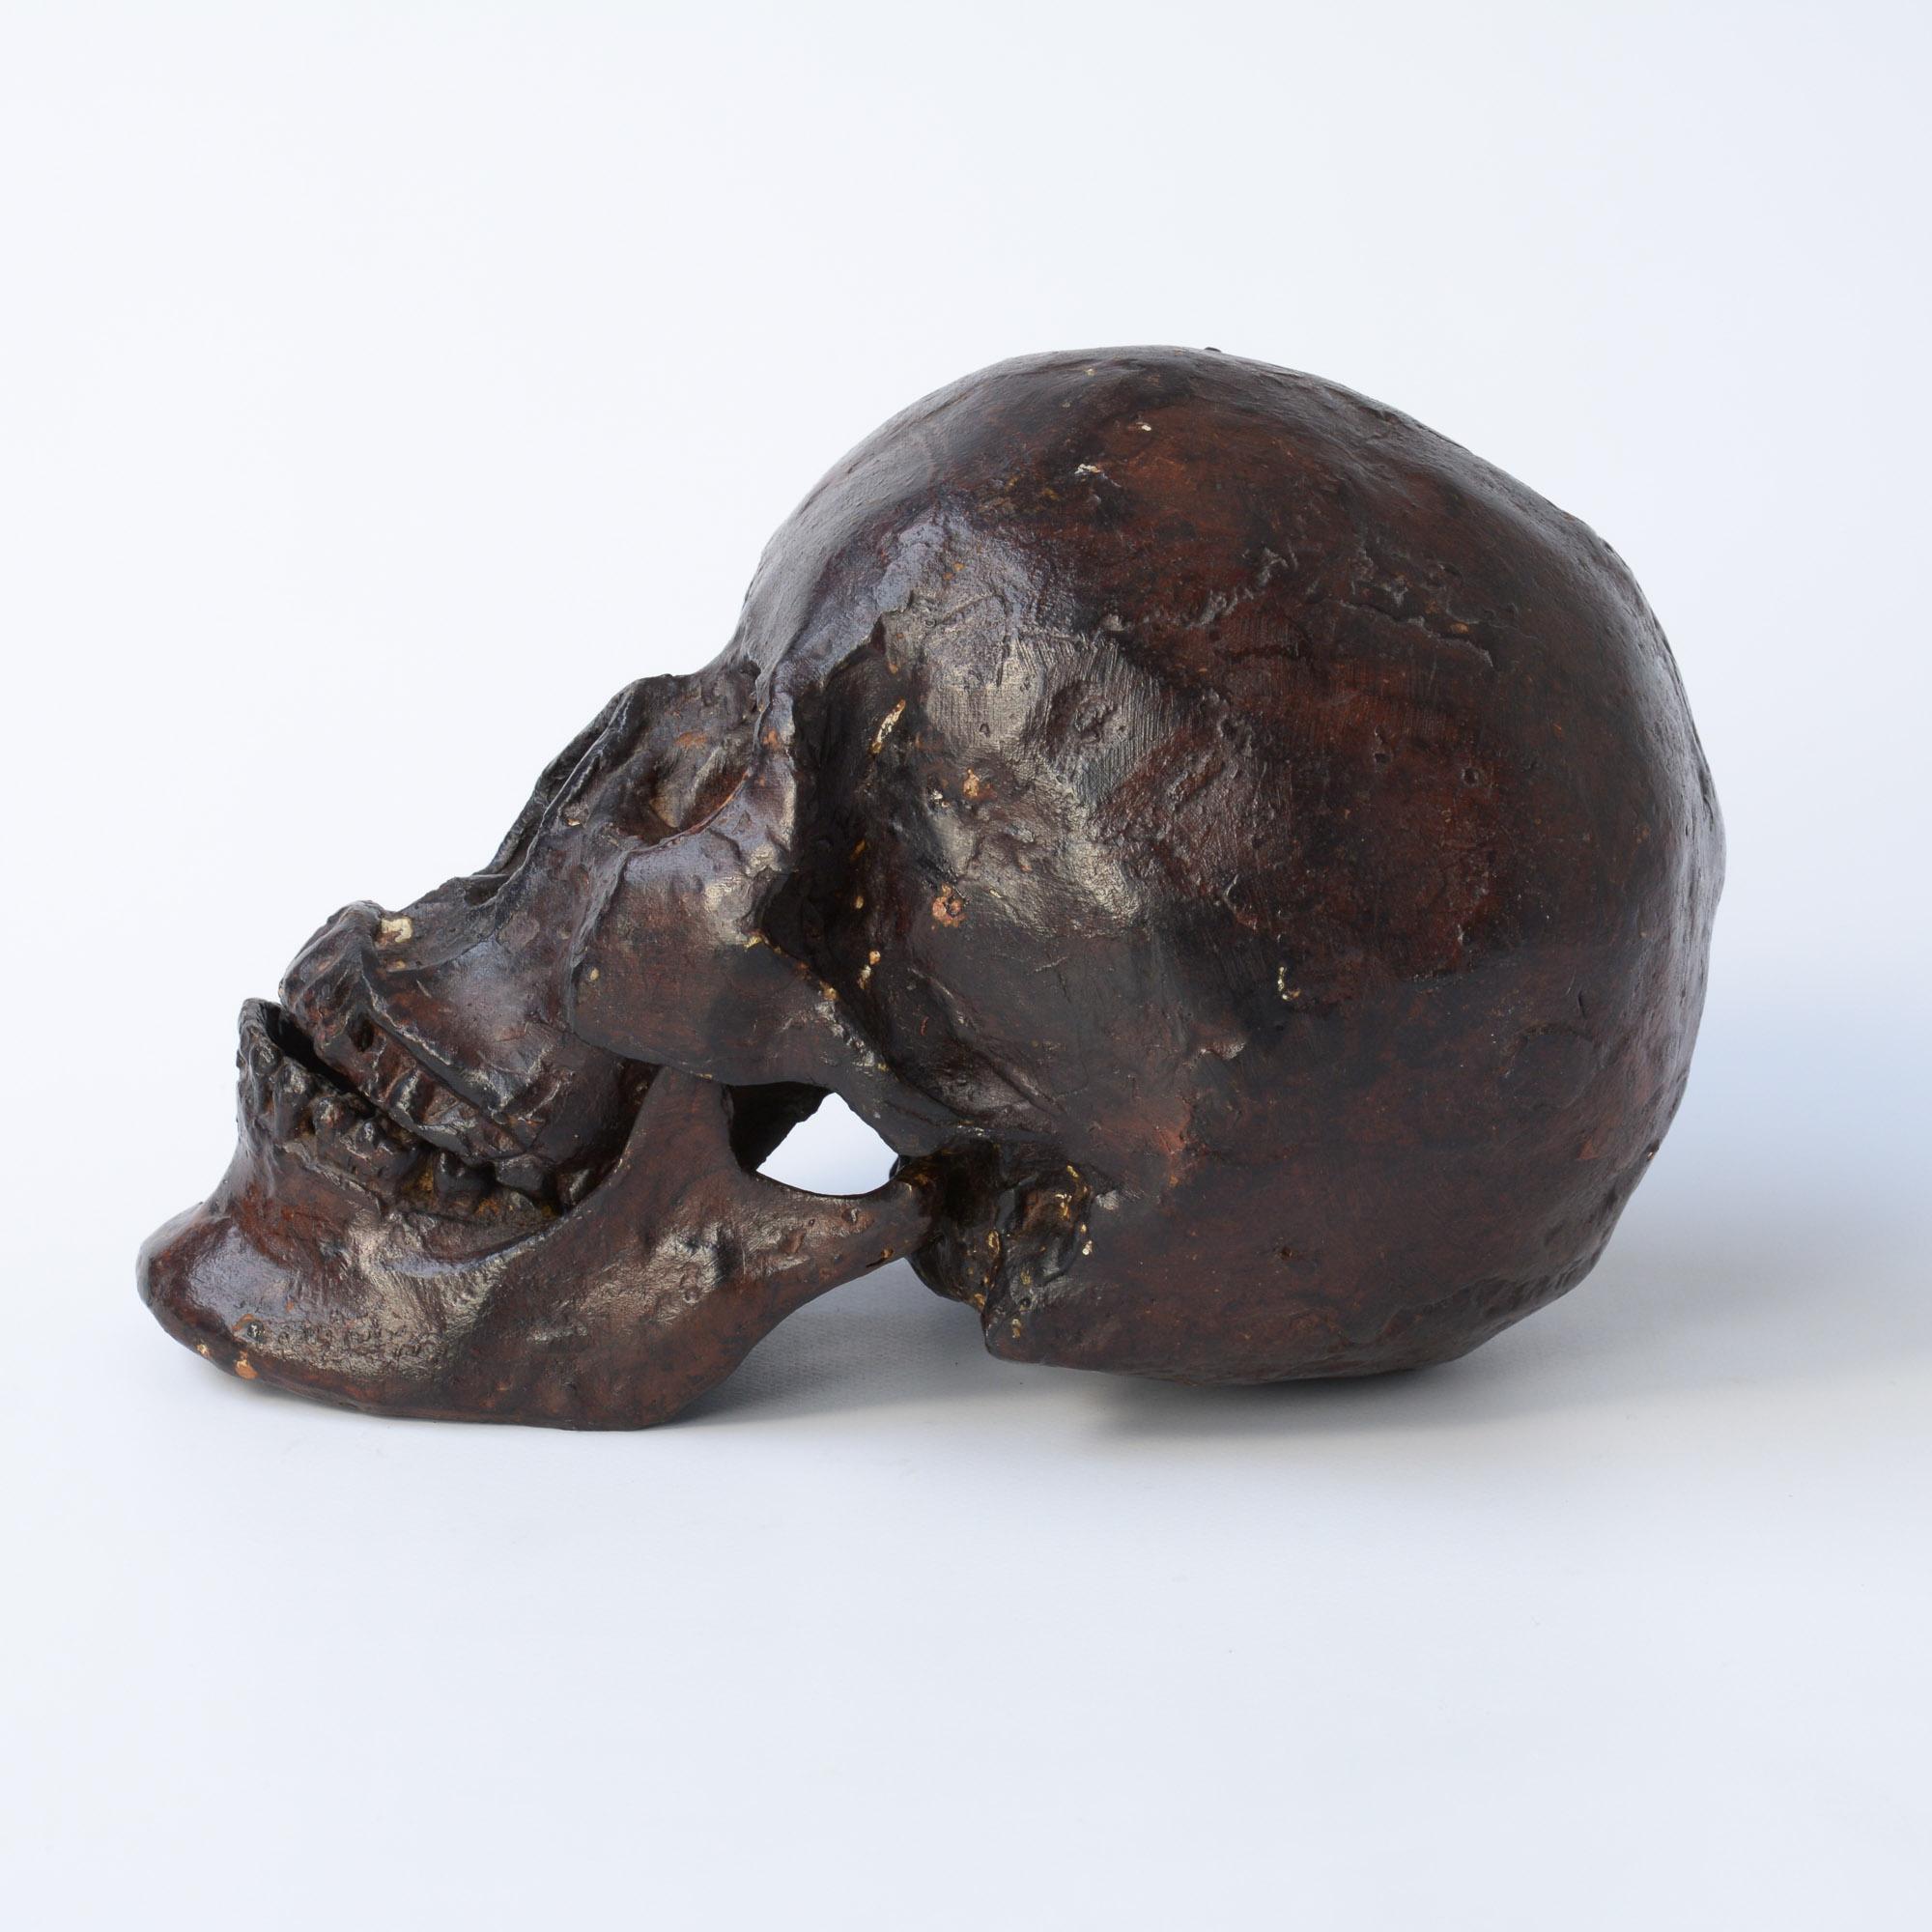 This bronze skull sculpture can be dated in the late 20th century. The bronze skull was made with the lost-wax casting methode. The model must have been a real human skull.
The skull is made in 2 parts, the skull and the lower jaw. The lower jaw is